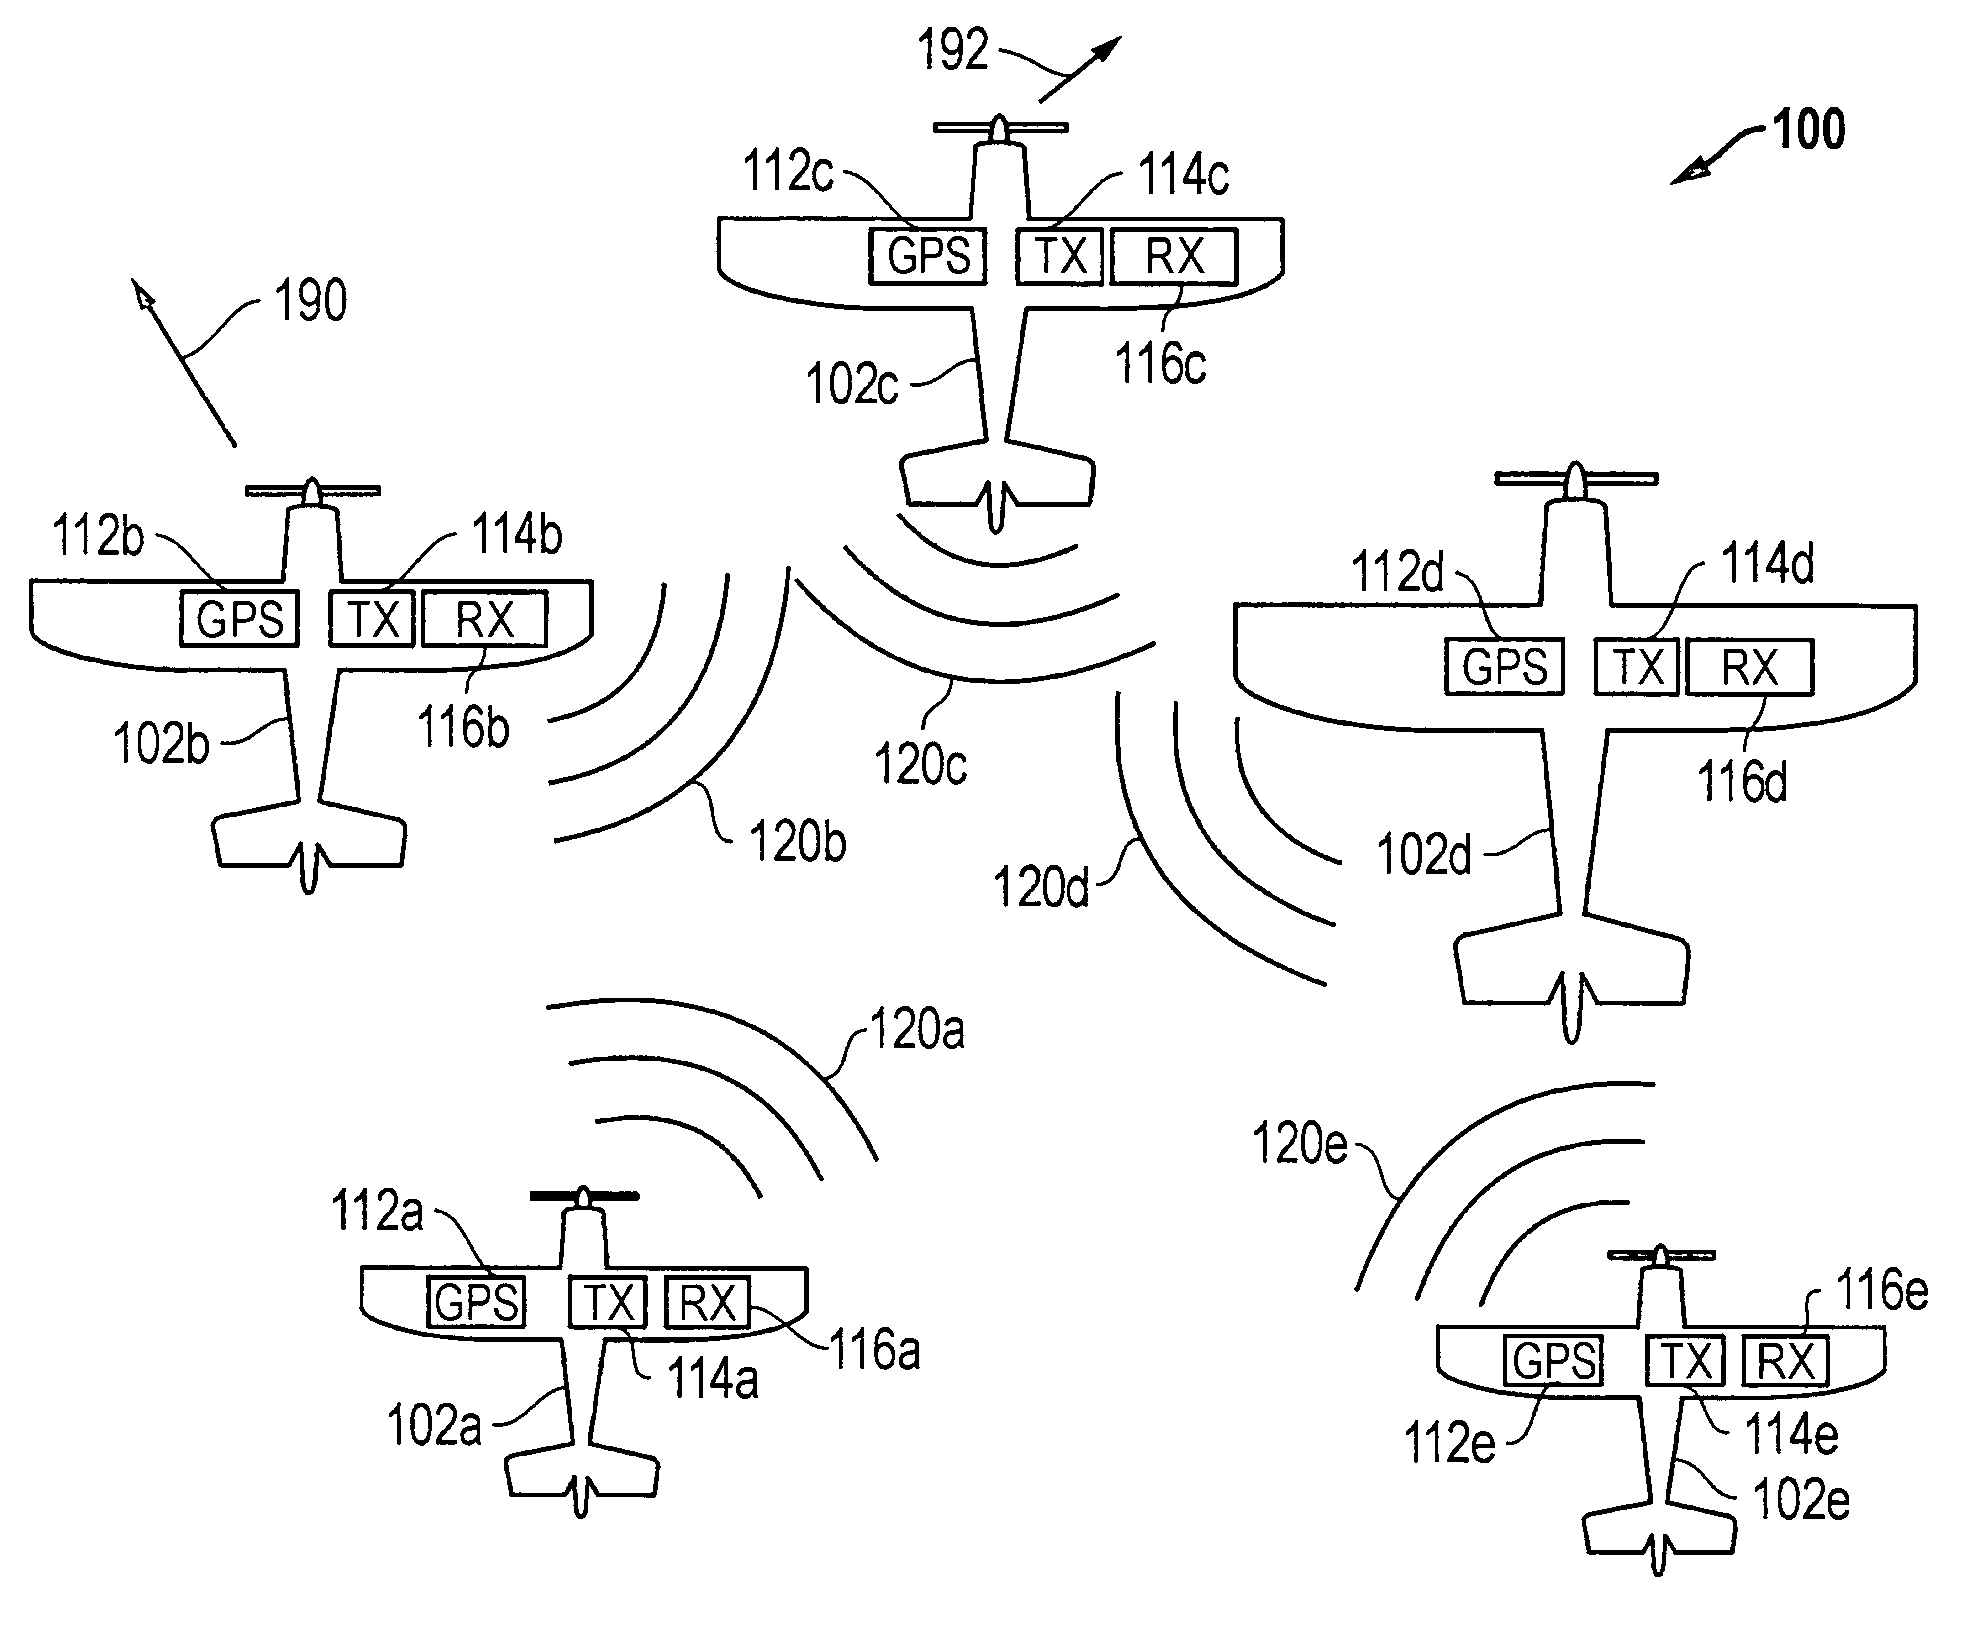 Systems and methods for coordination of entities and/or communicating location information